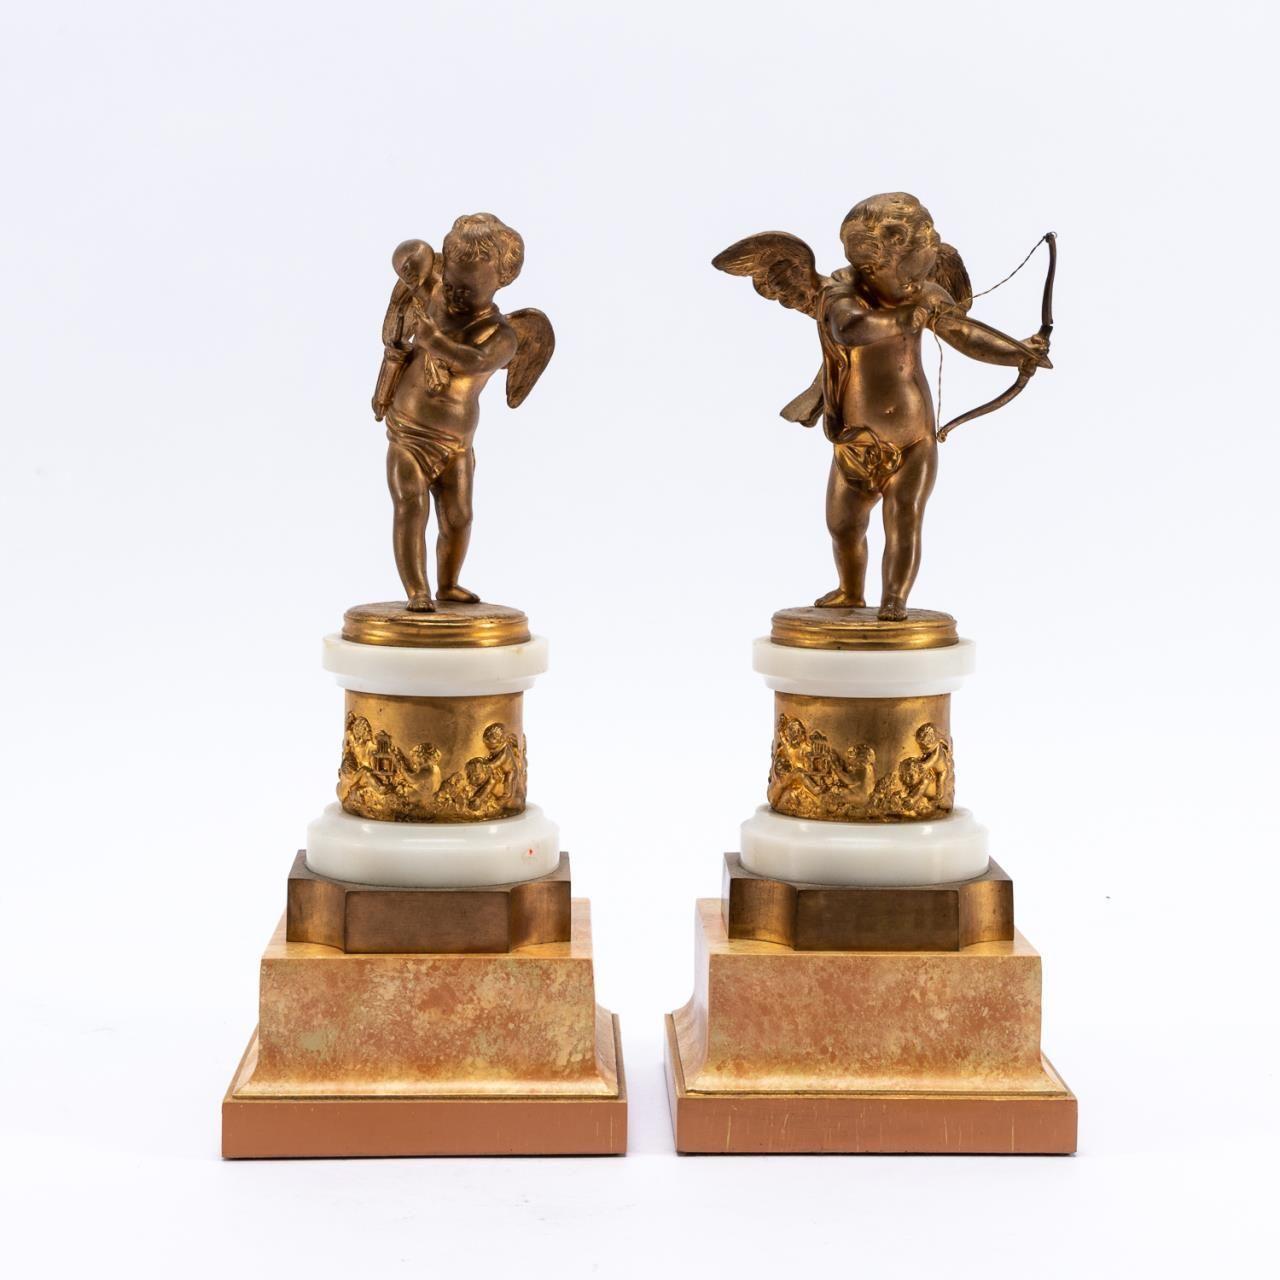 French, late 19th to early 20th century. Pair of gilt bronze cupid mantel statuettes, one with bow drawn and one removing an arrow, on white marble plinths with figural cherub plaques, with later faux marble wooden bases. Each signed in mould